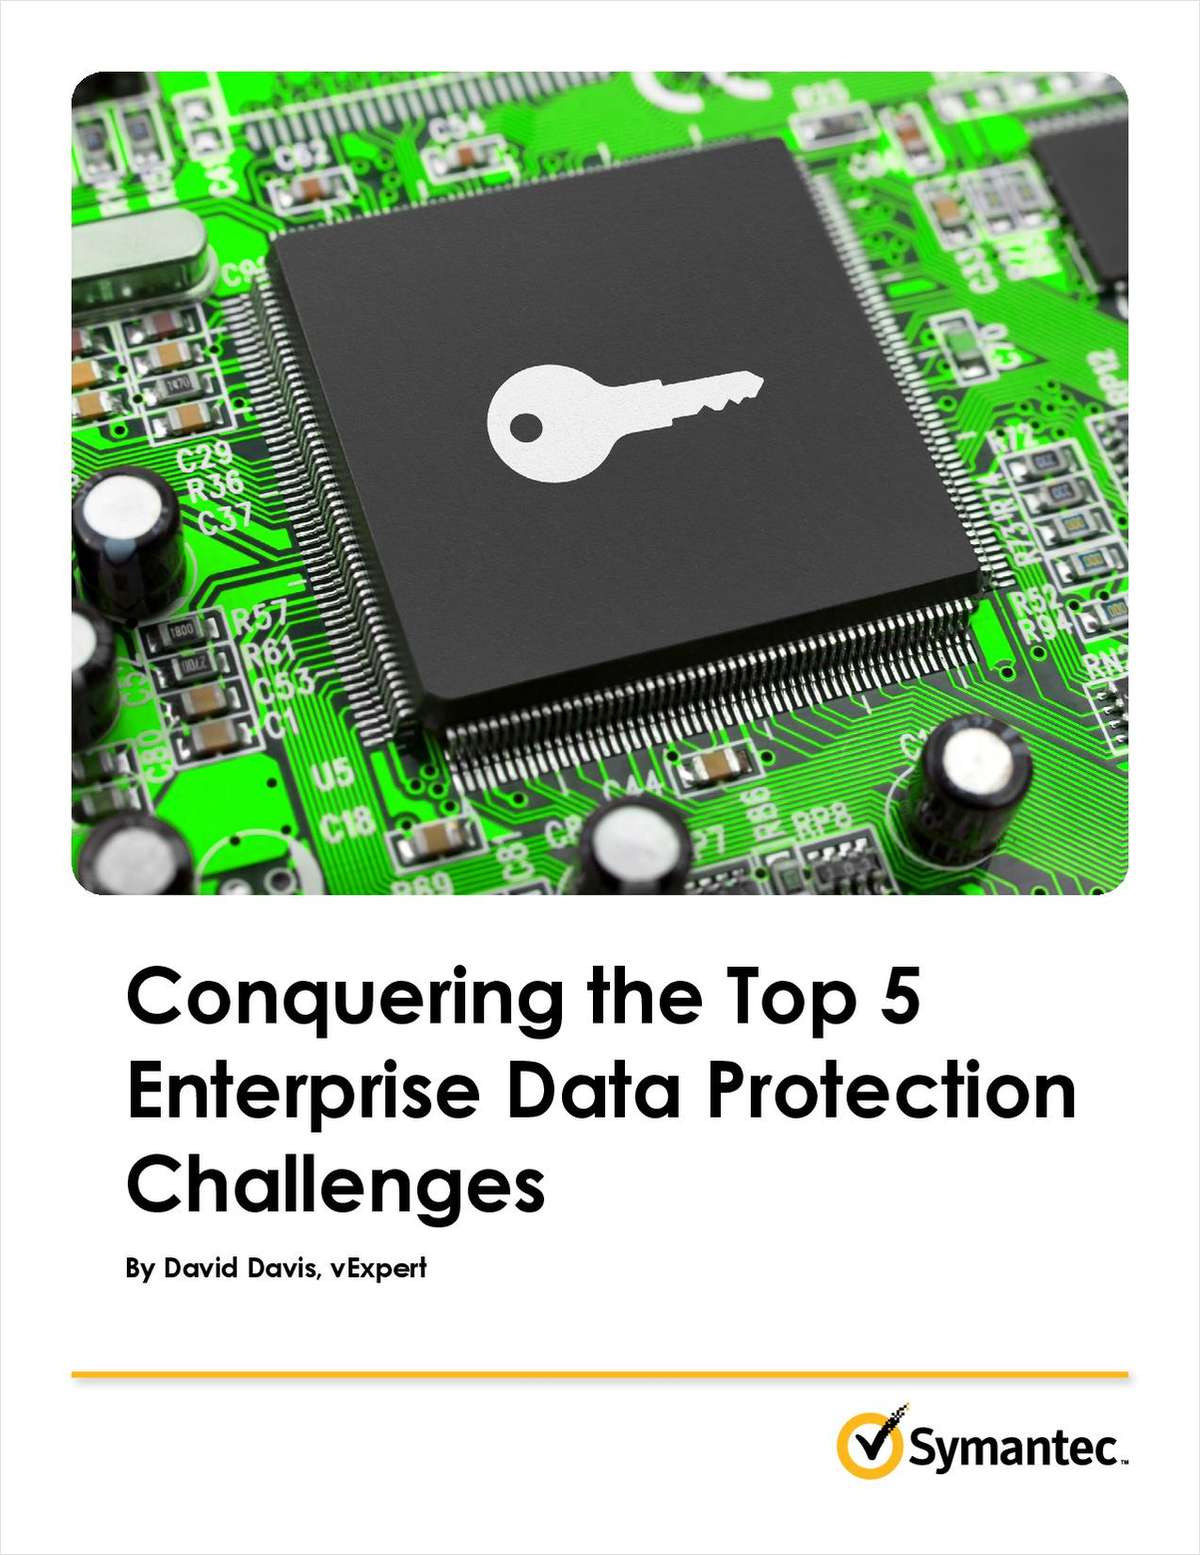 Conquering the Top 5 Enterprise Data Protection Challenges